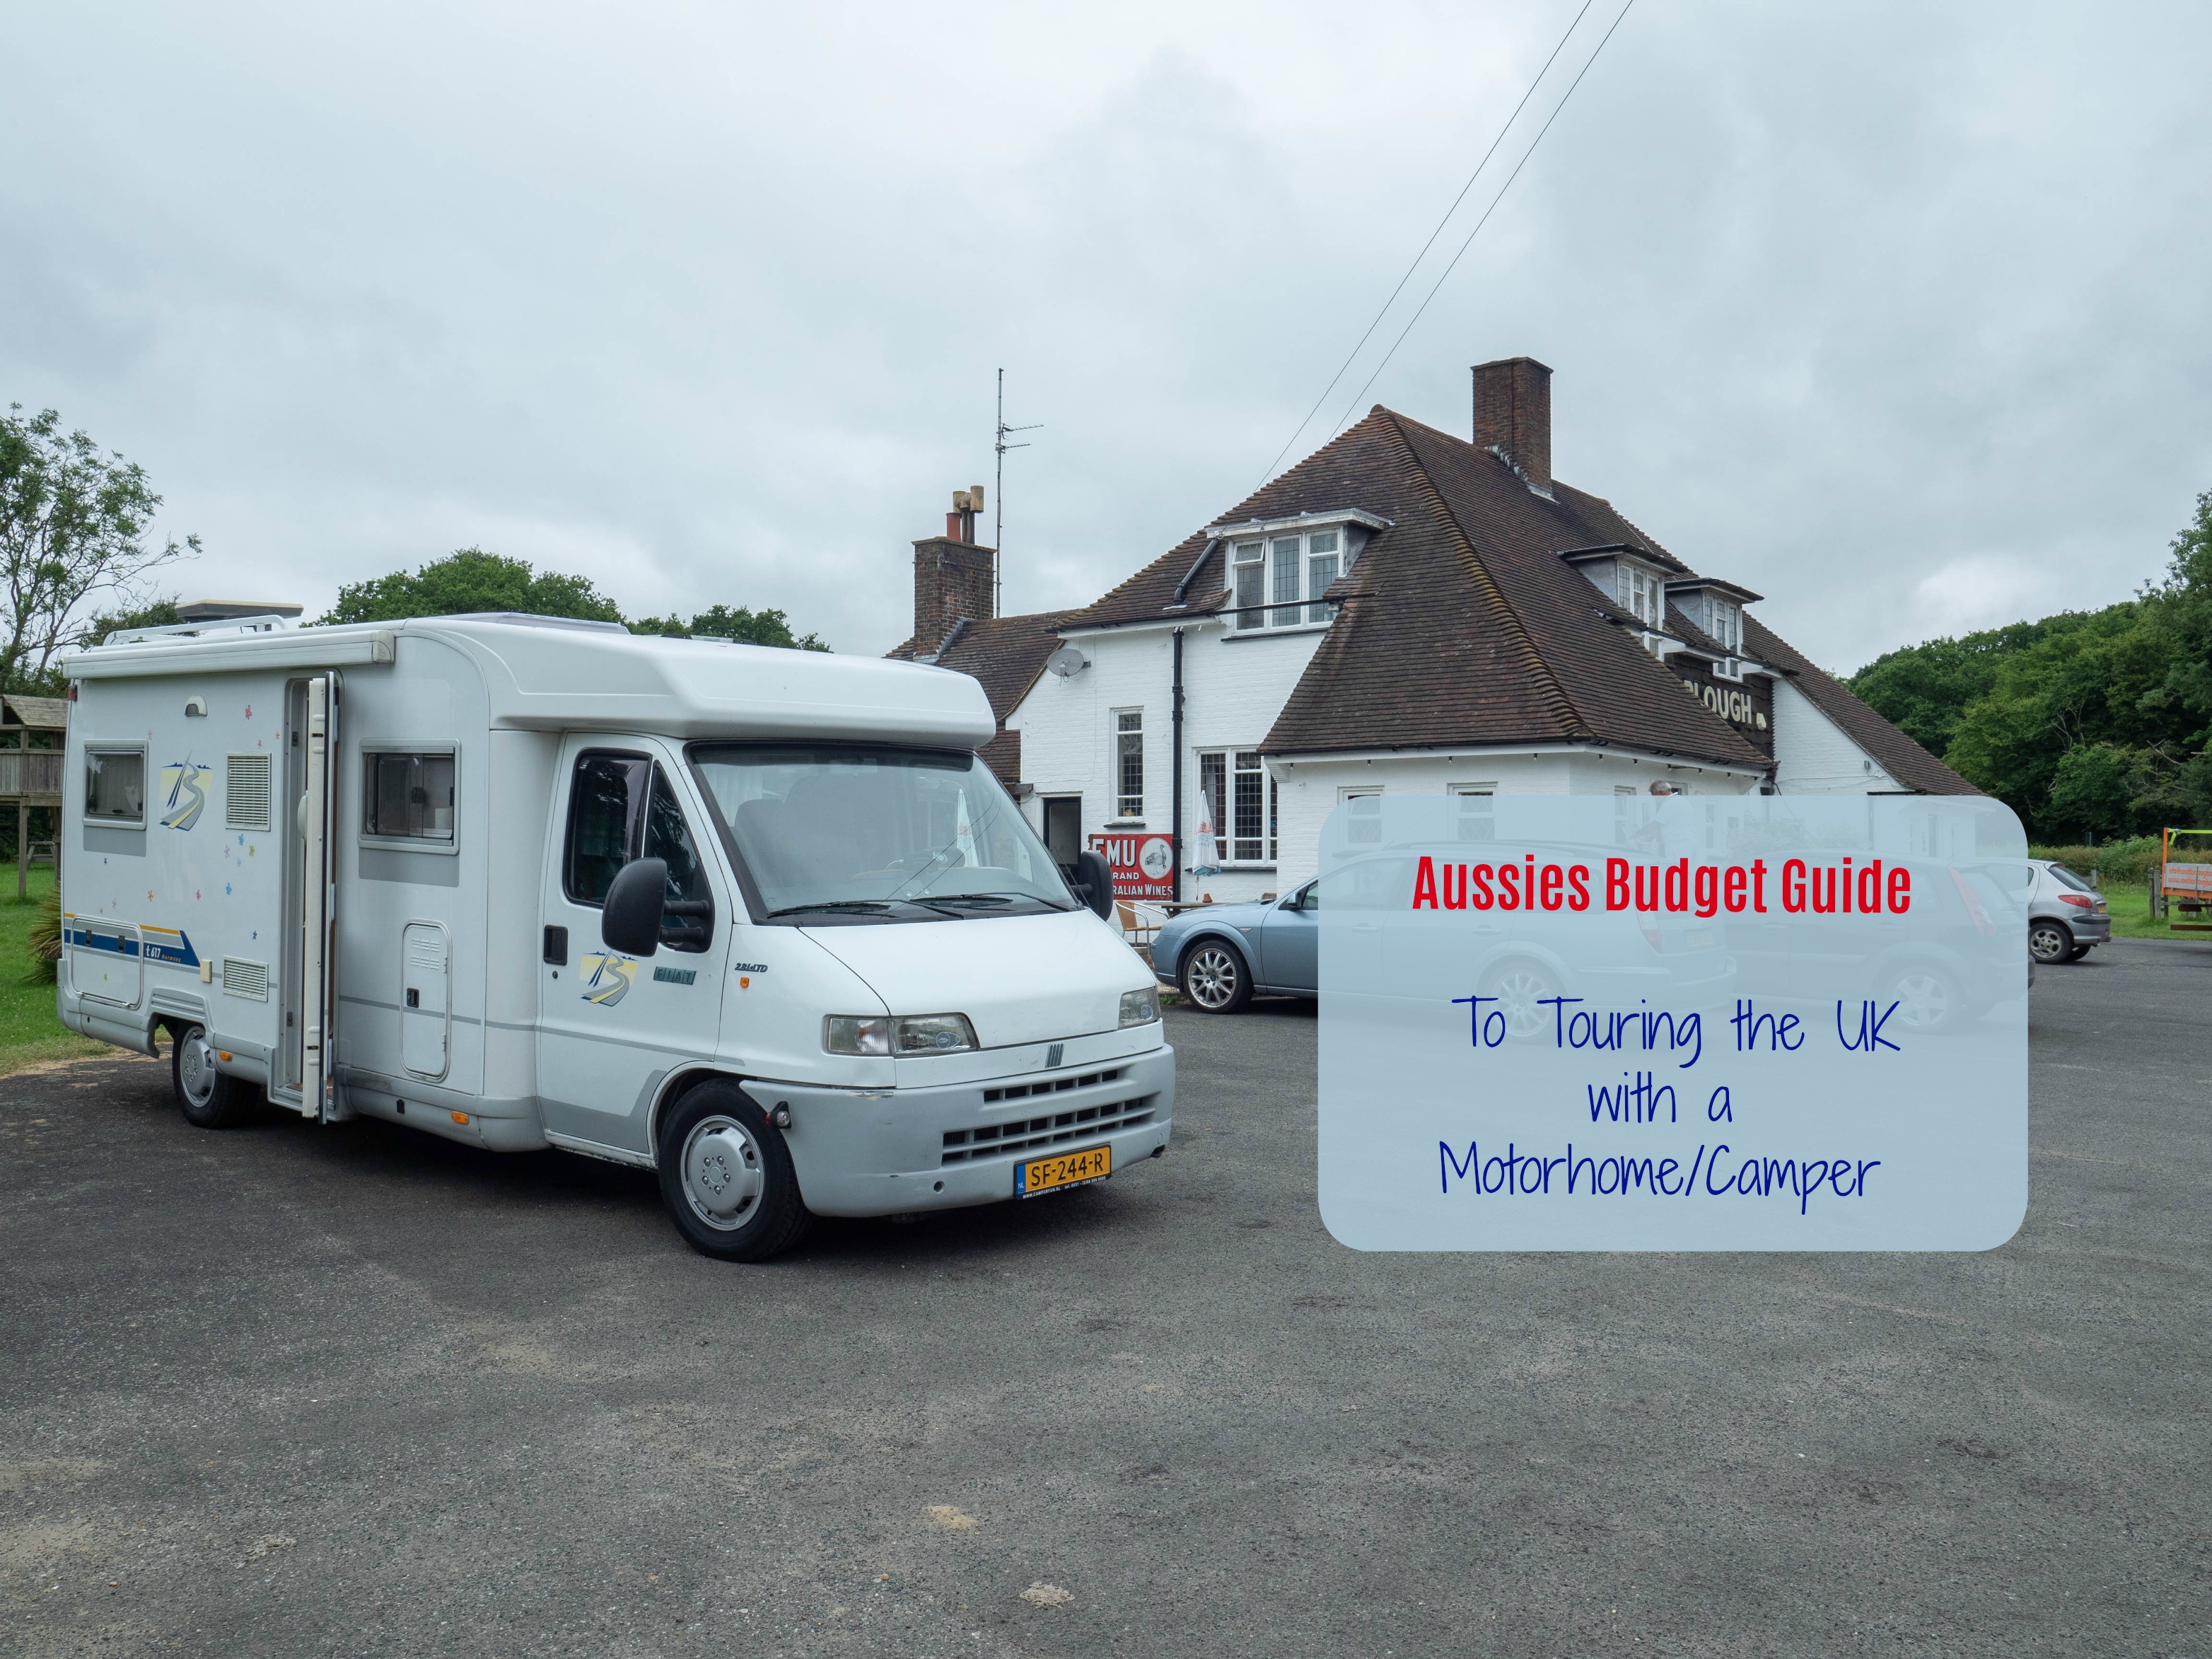 Aussies Budget Guide to Touring the UK with a Motorhome/Camper